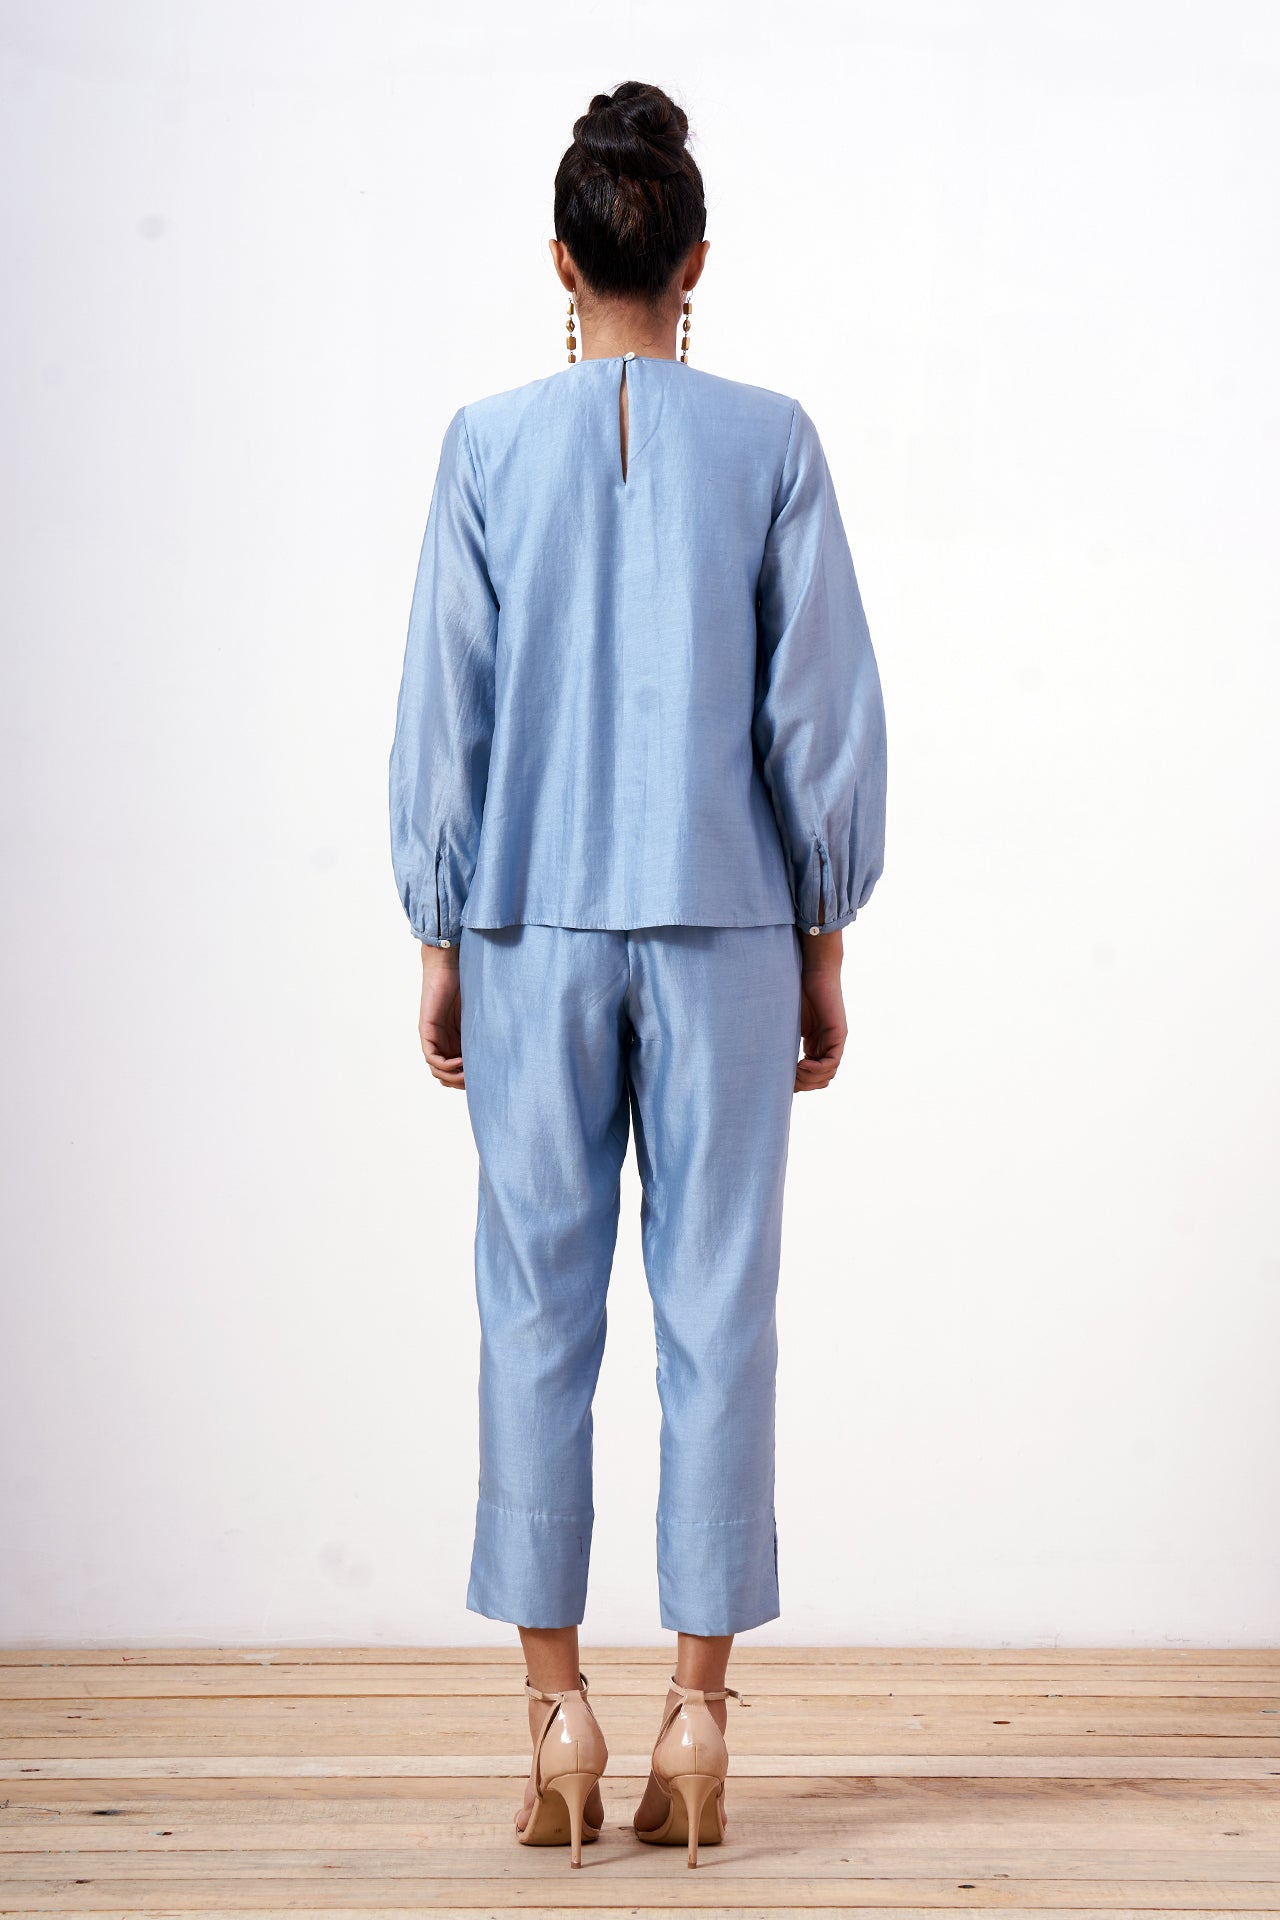 Miriam - Powder Blue Demure Top with Ankle Pants